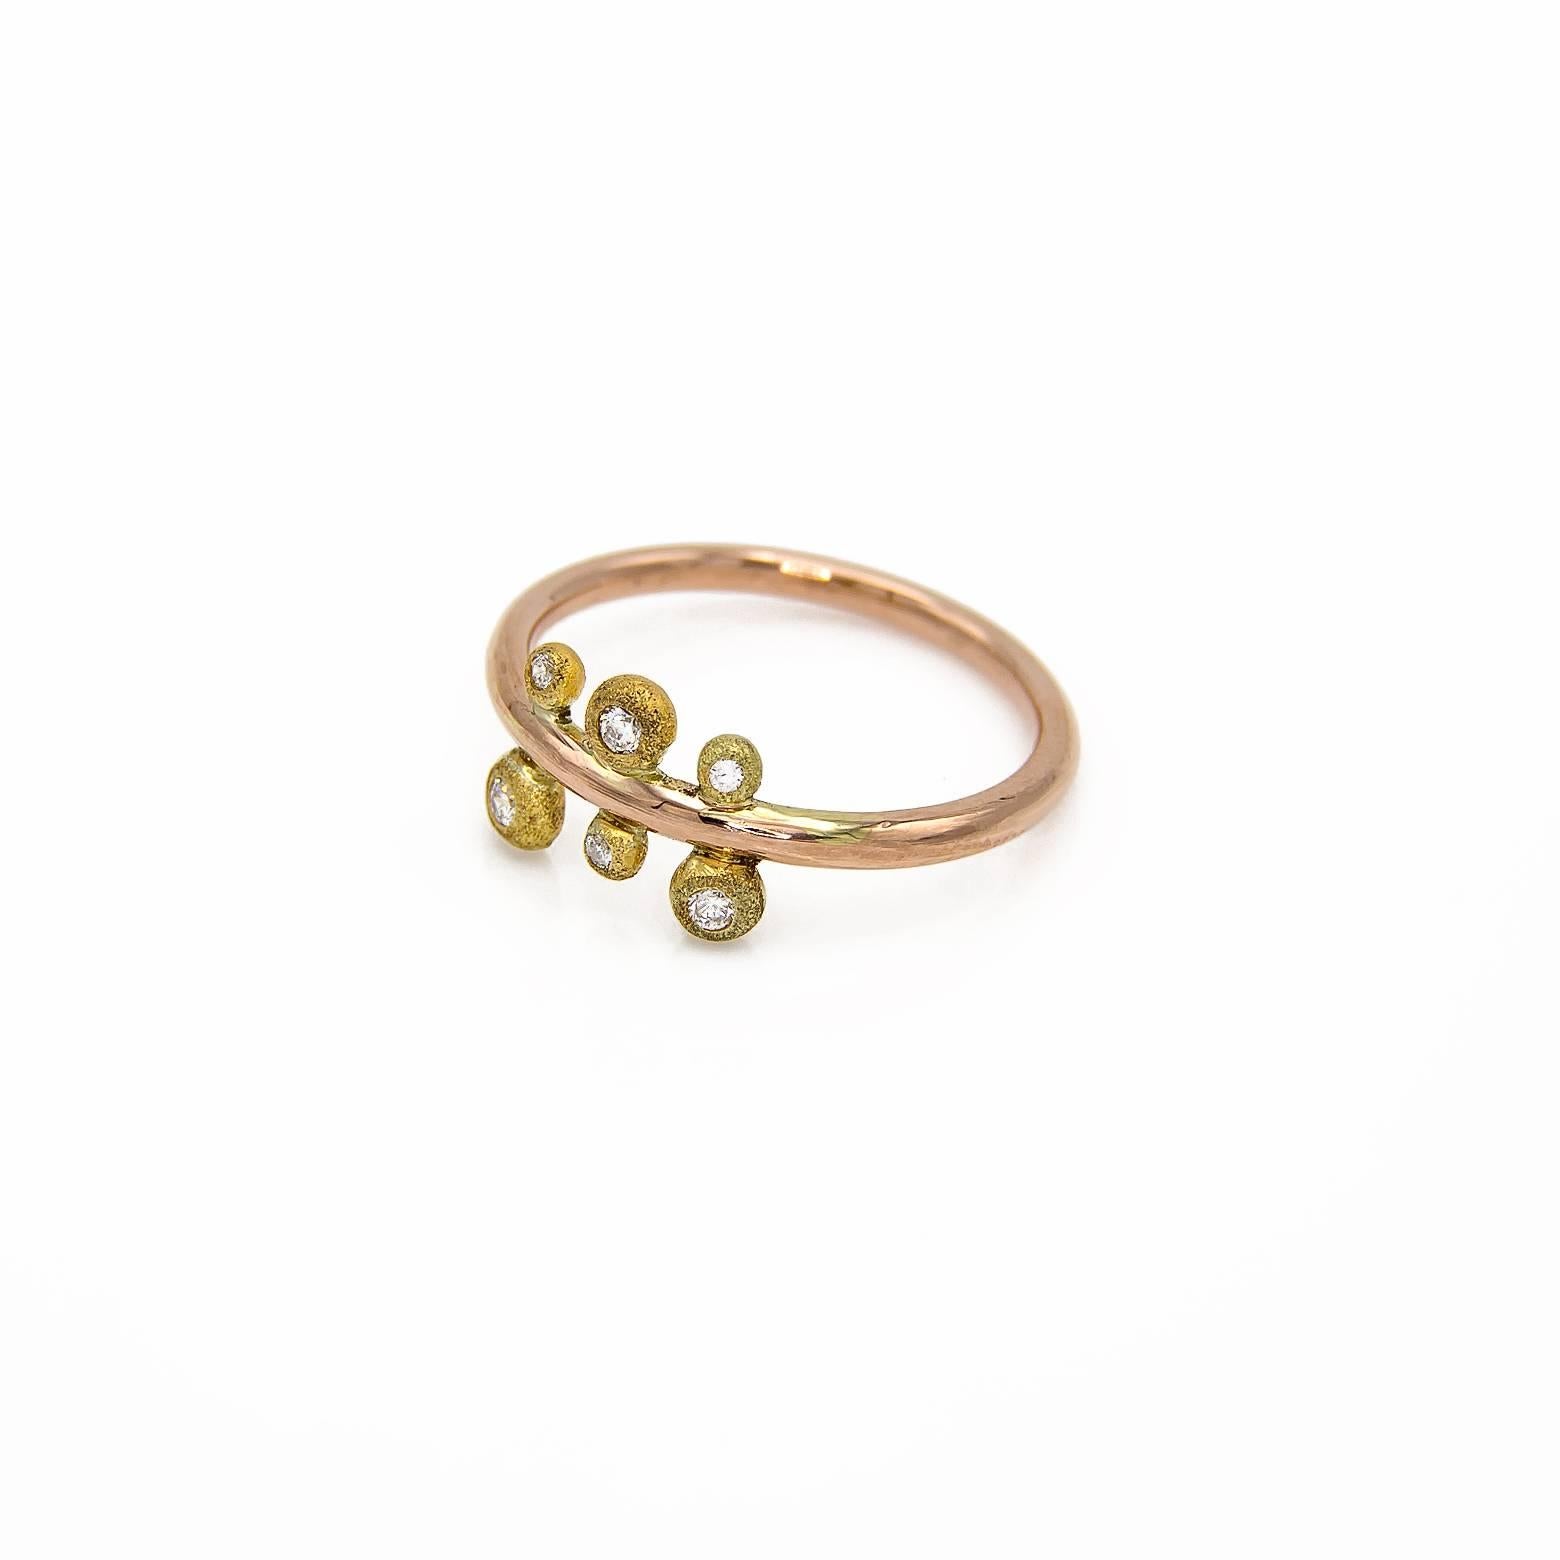 This fanciful ring is a combination of yellow and rose gold. The 'fern' design is accented with 0.08 tw diamonds set in textured yellow gold on a smooth band of rose gold. The size is 6.5.The sparkle and whimsy of this ring is striking!!